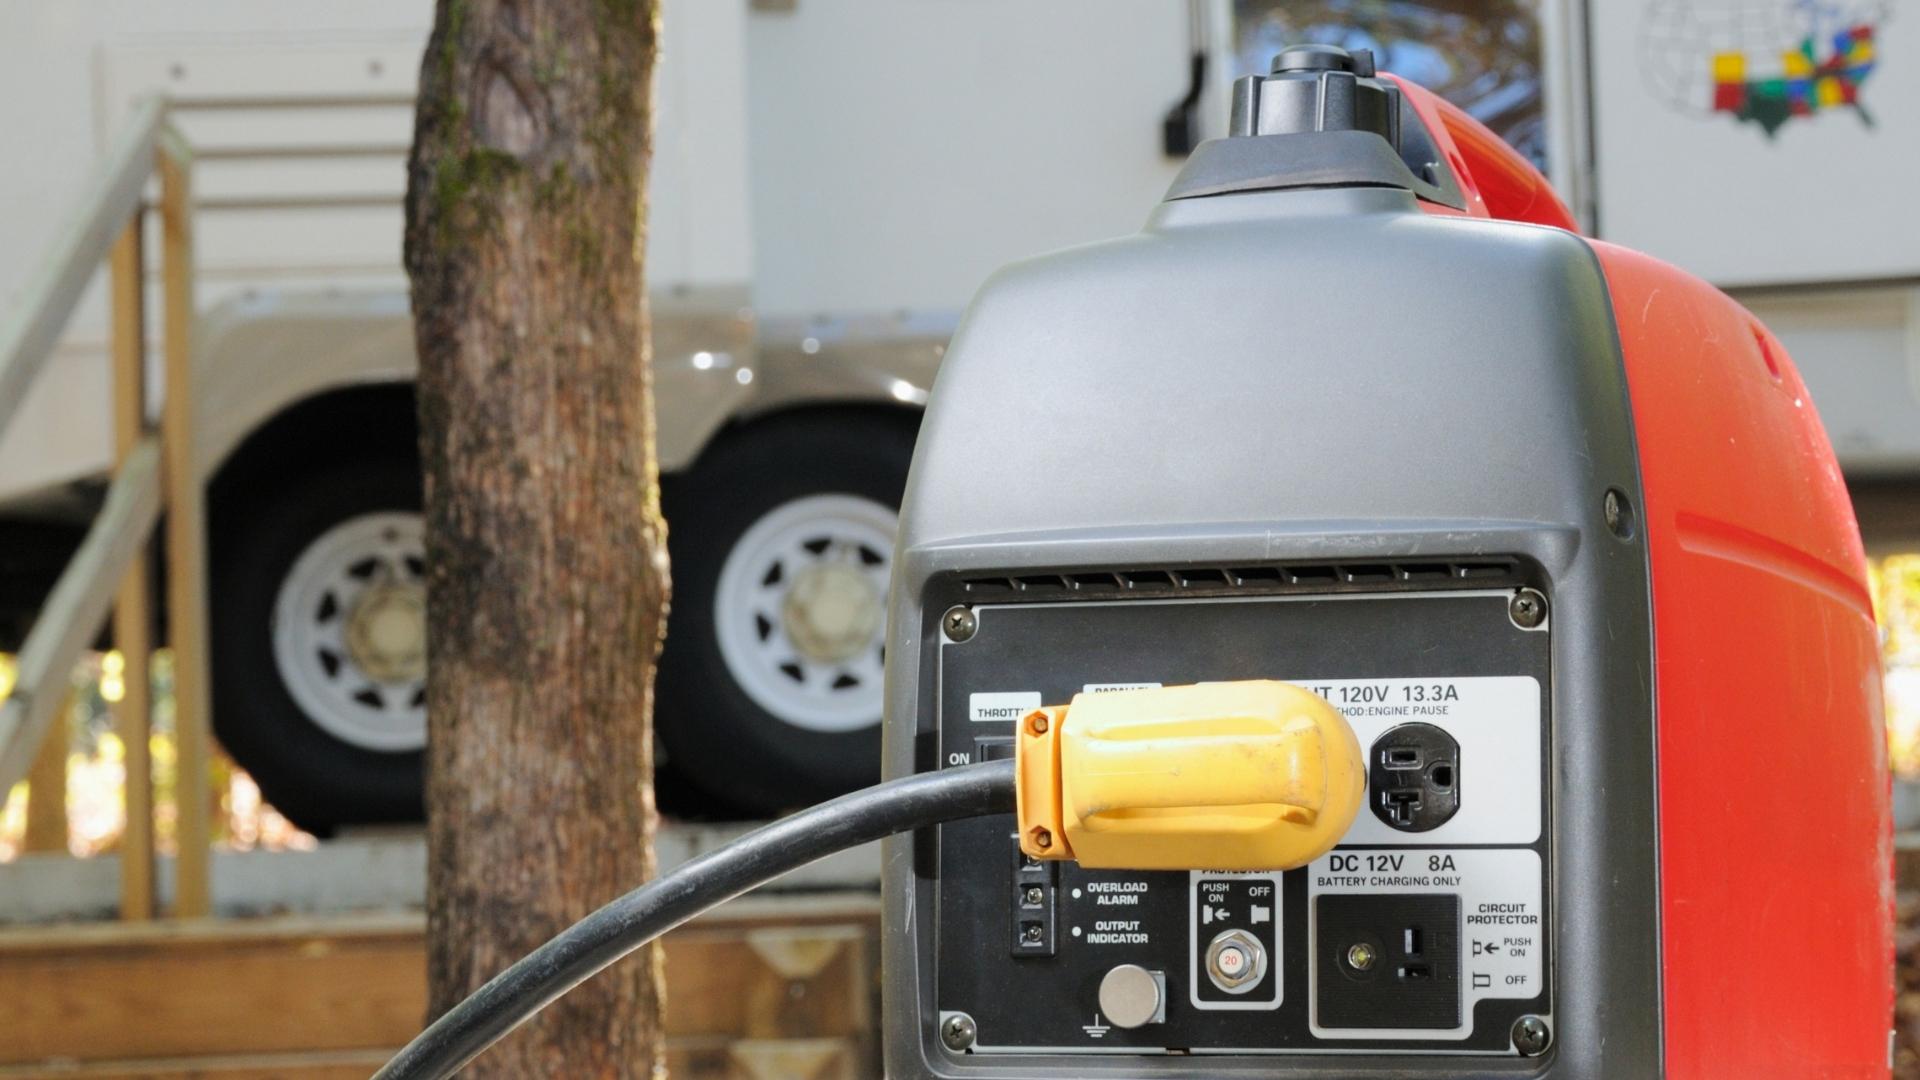 RV microwave not working? Photo of a portable inverter generator powering an RV